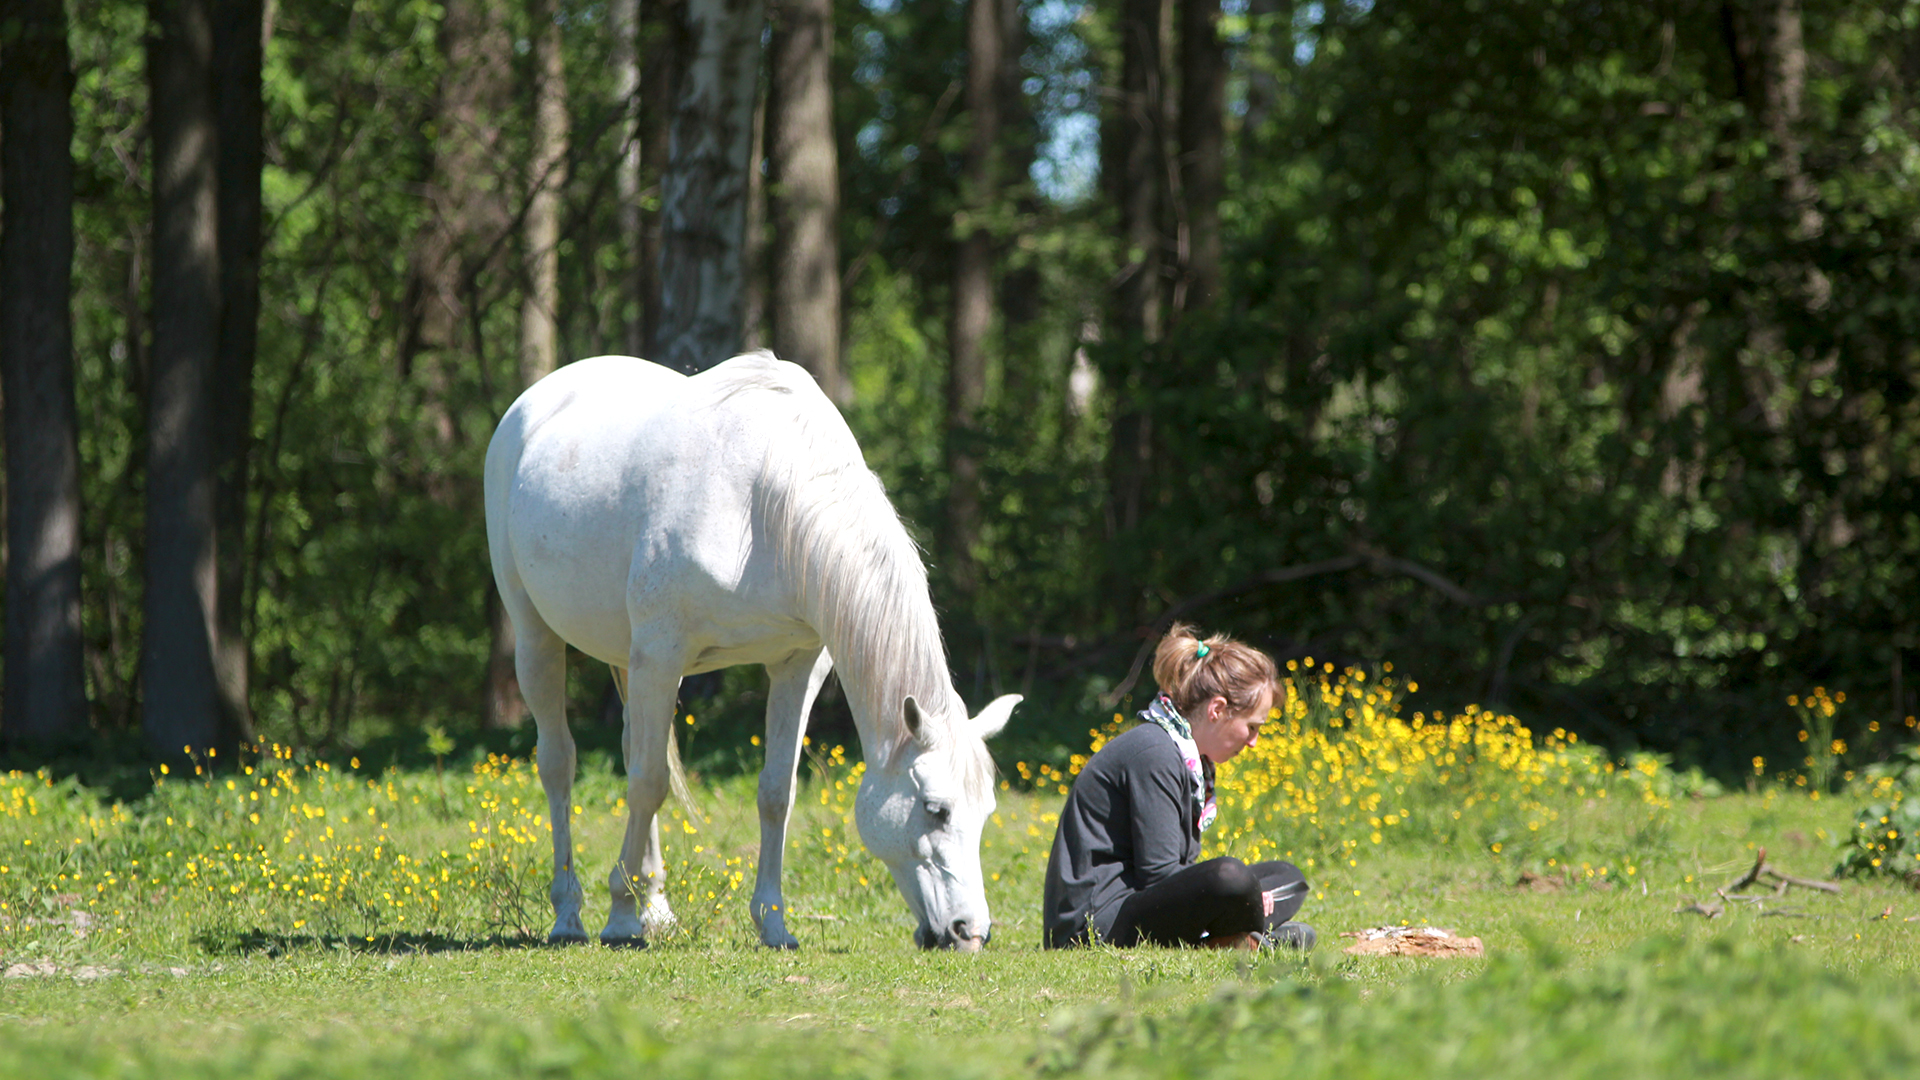 Woman sitting reflecting, doing art - with a horse supporting her